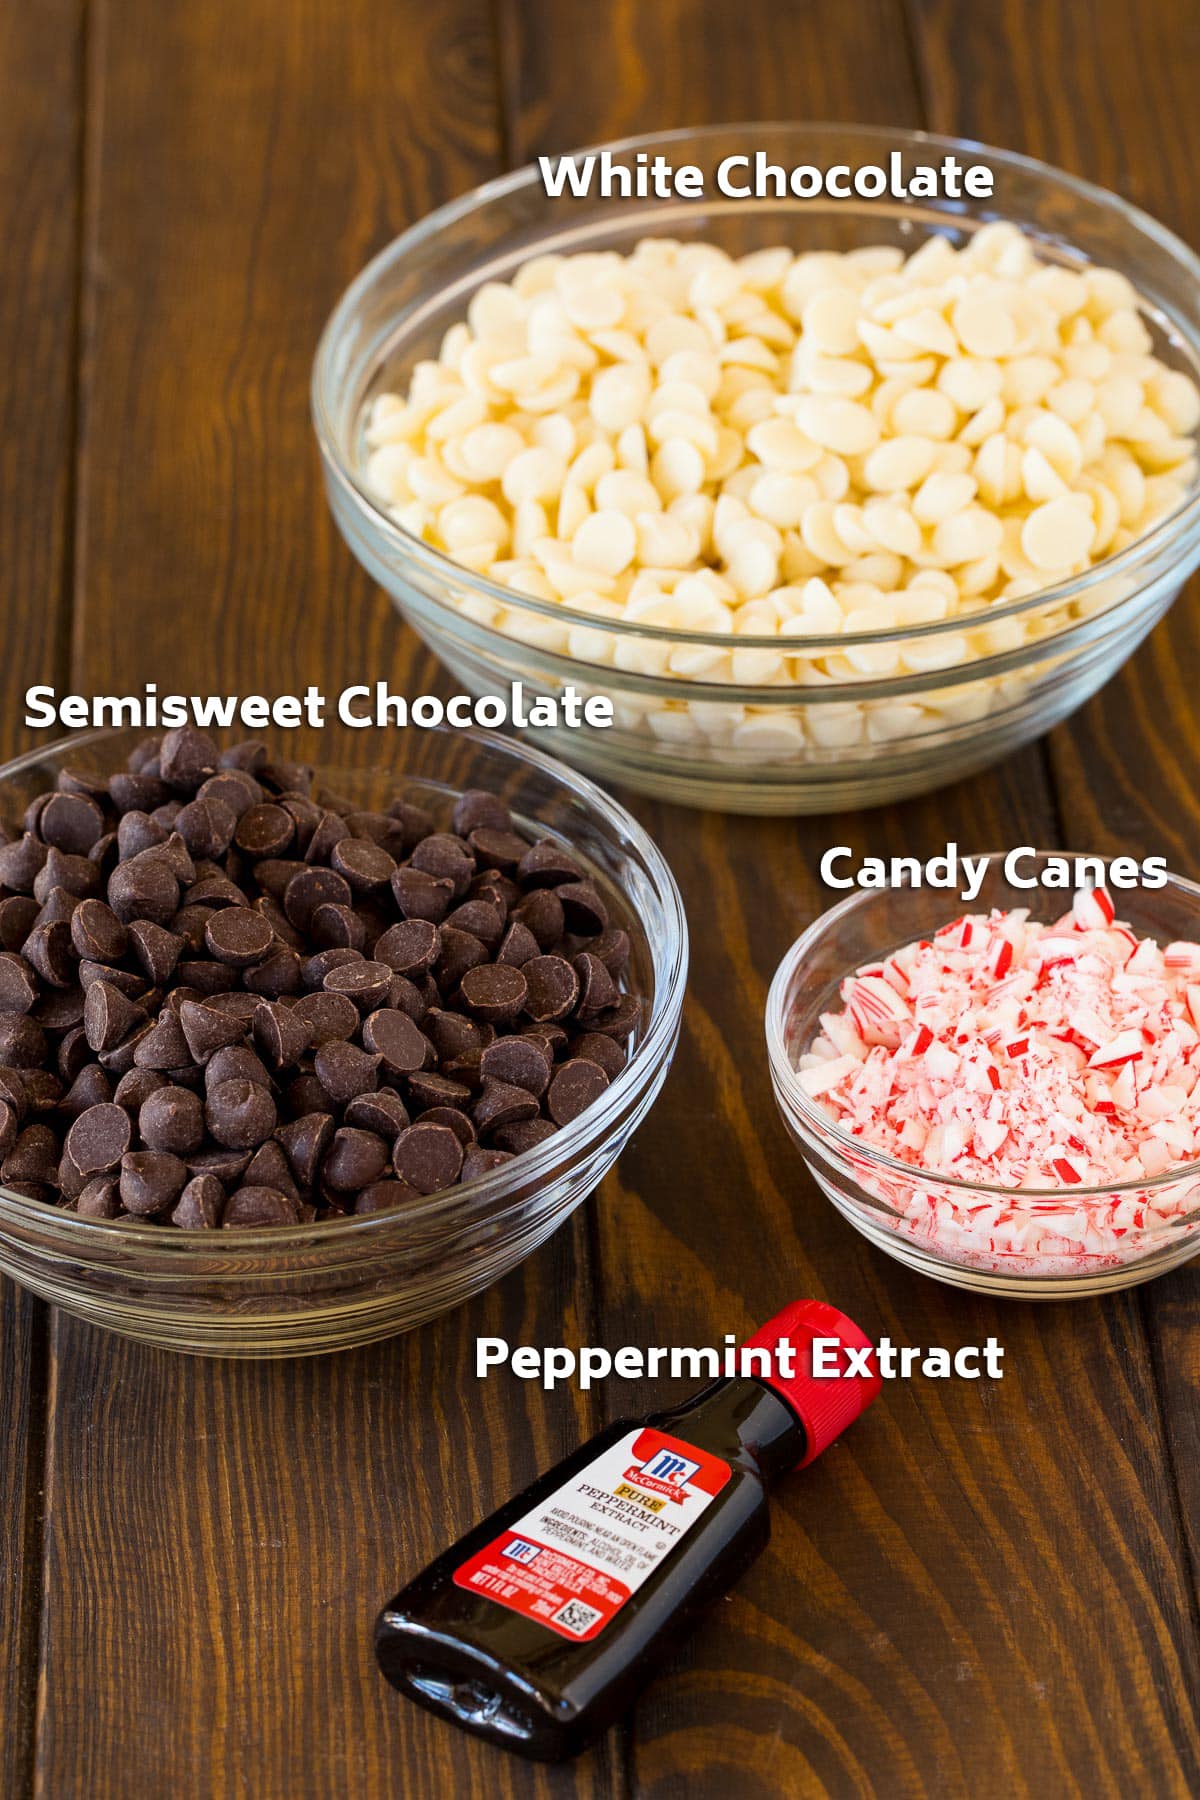 Ingredients including white chocolate, dark chocolate, peppermint extract and candy canes.